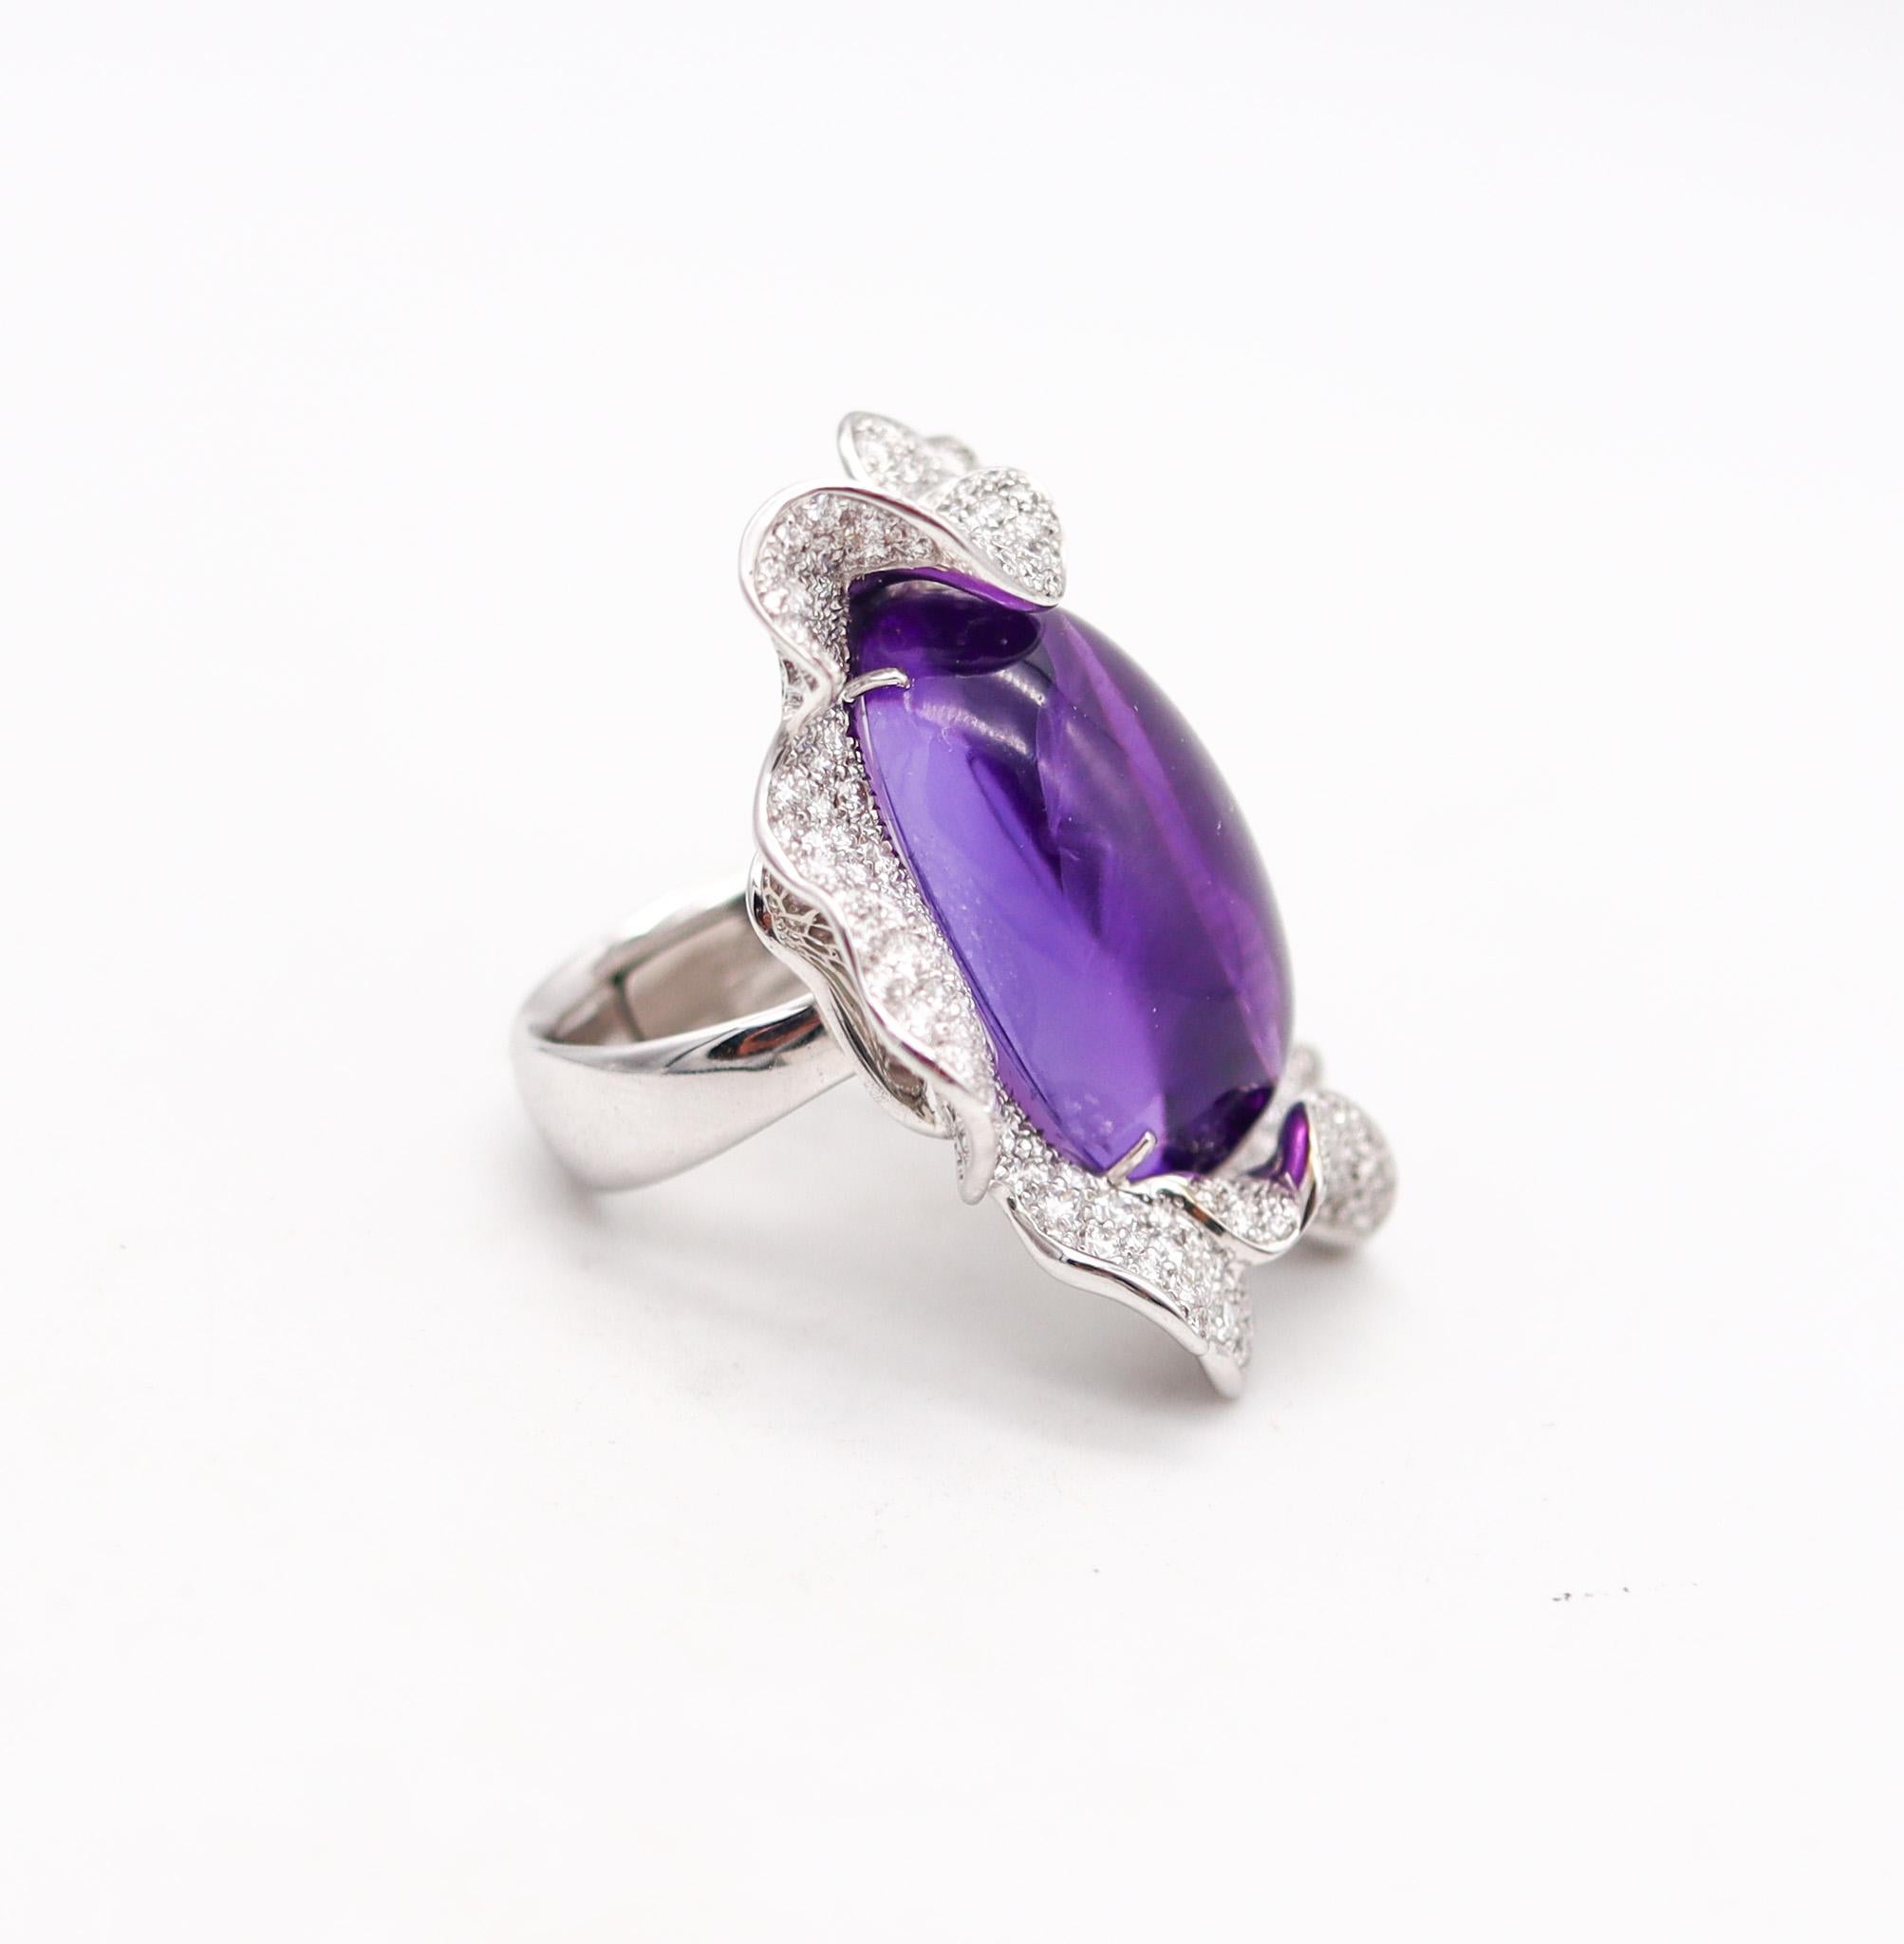 Brilliant Cut Palmiero Milano Cocktail Ring In 18Kt White Gold 33.09 Ctw Diamonds And Amethyst